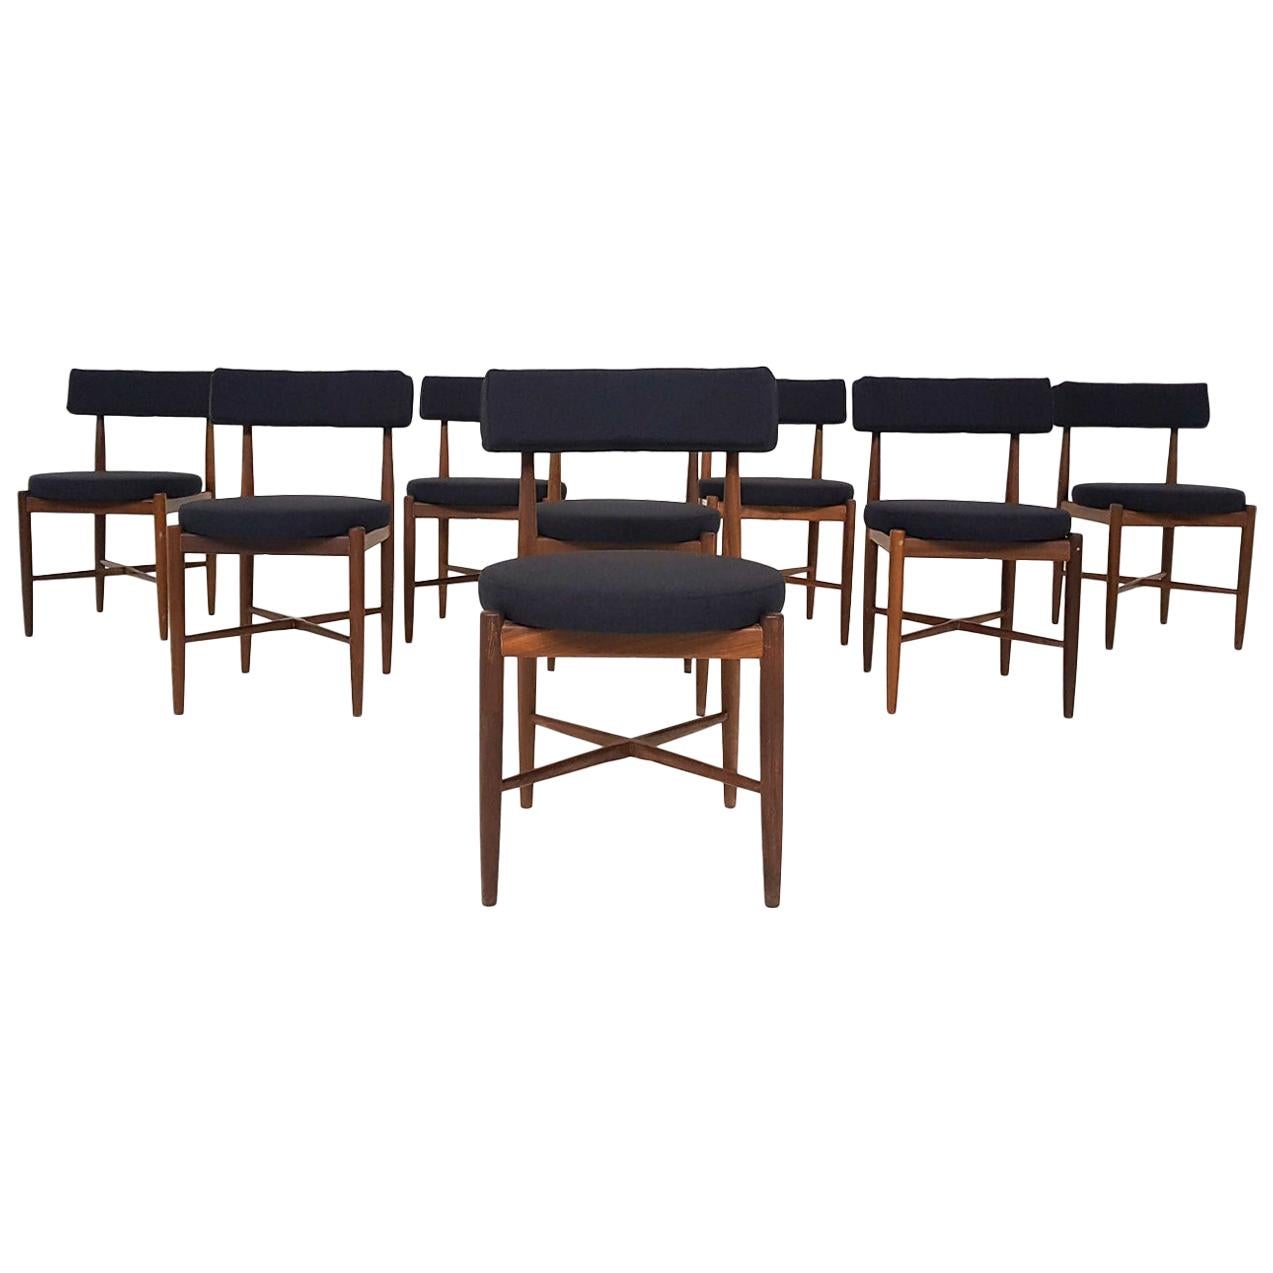 Set of 8 Victor Wilkins Teak Dining Chairs for G-plan, United Kingdom, 1960s